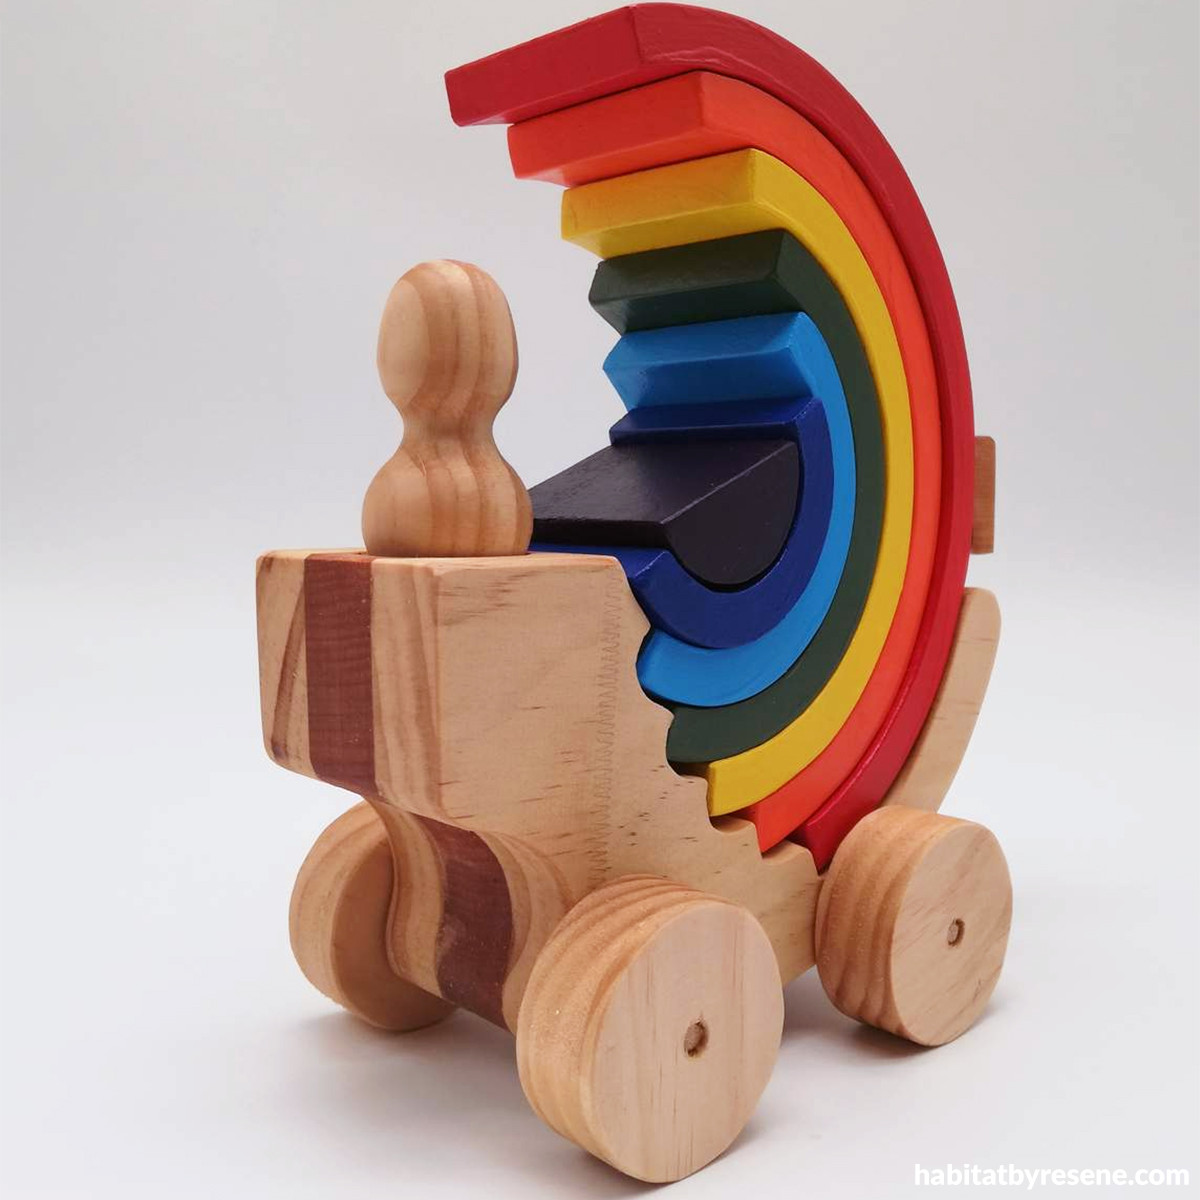 Wooden wonderland: Colourful children's toys made in New Zealand